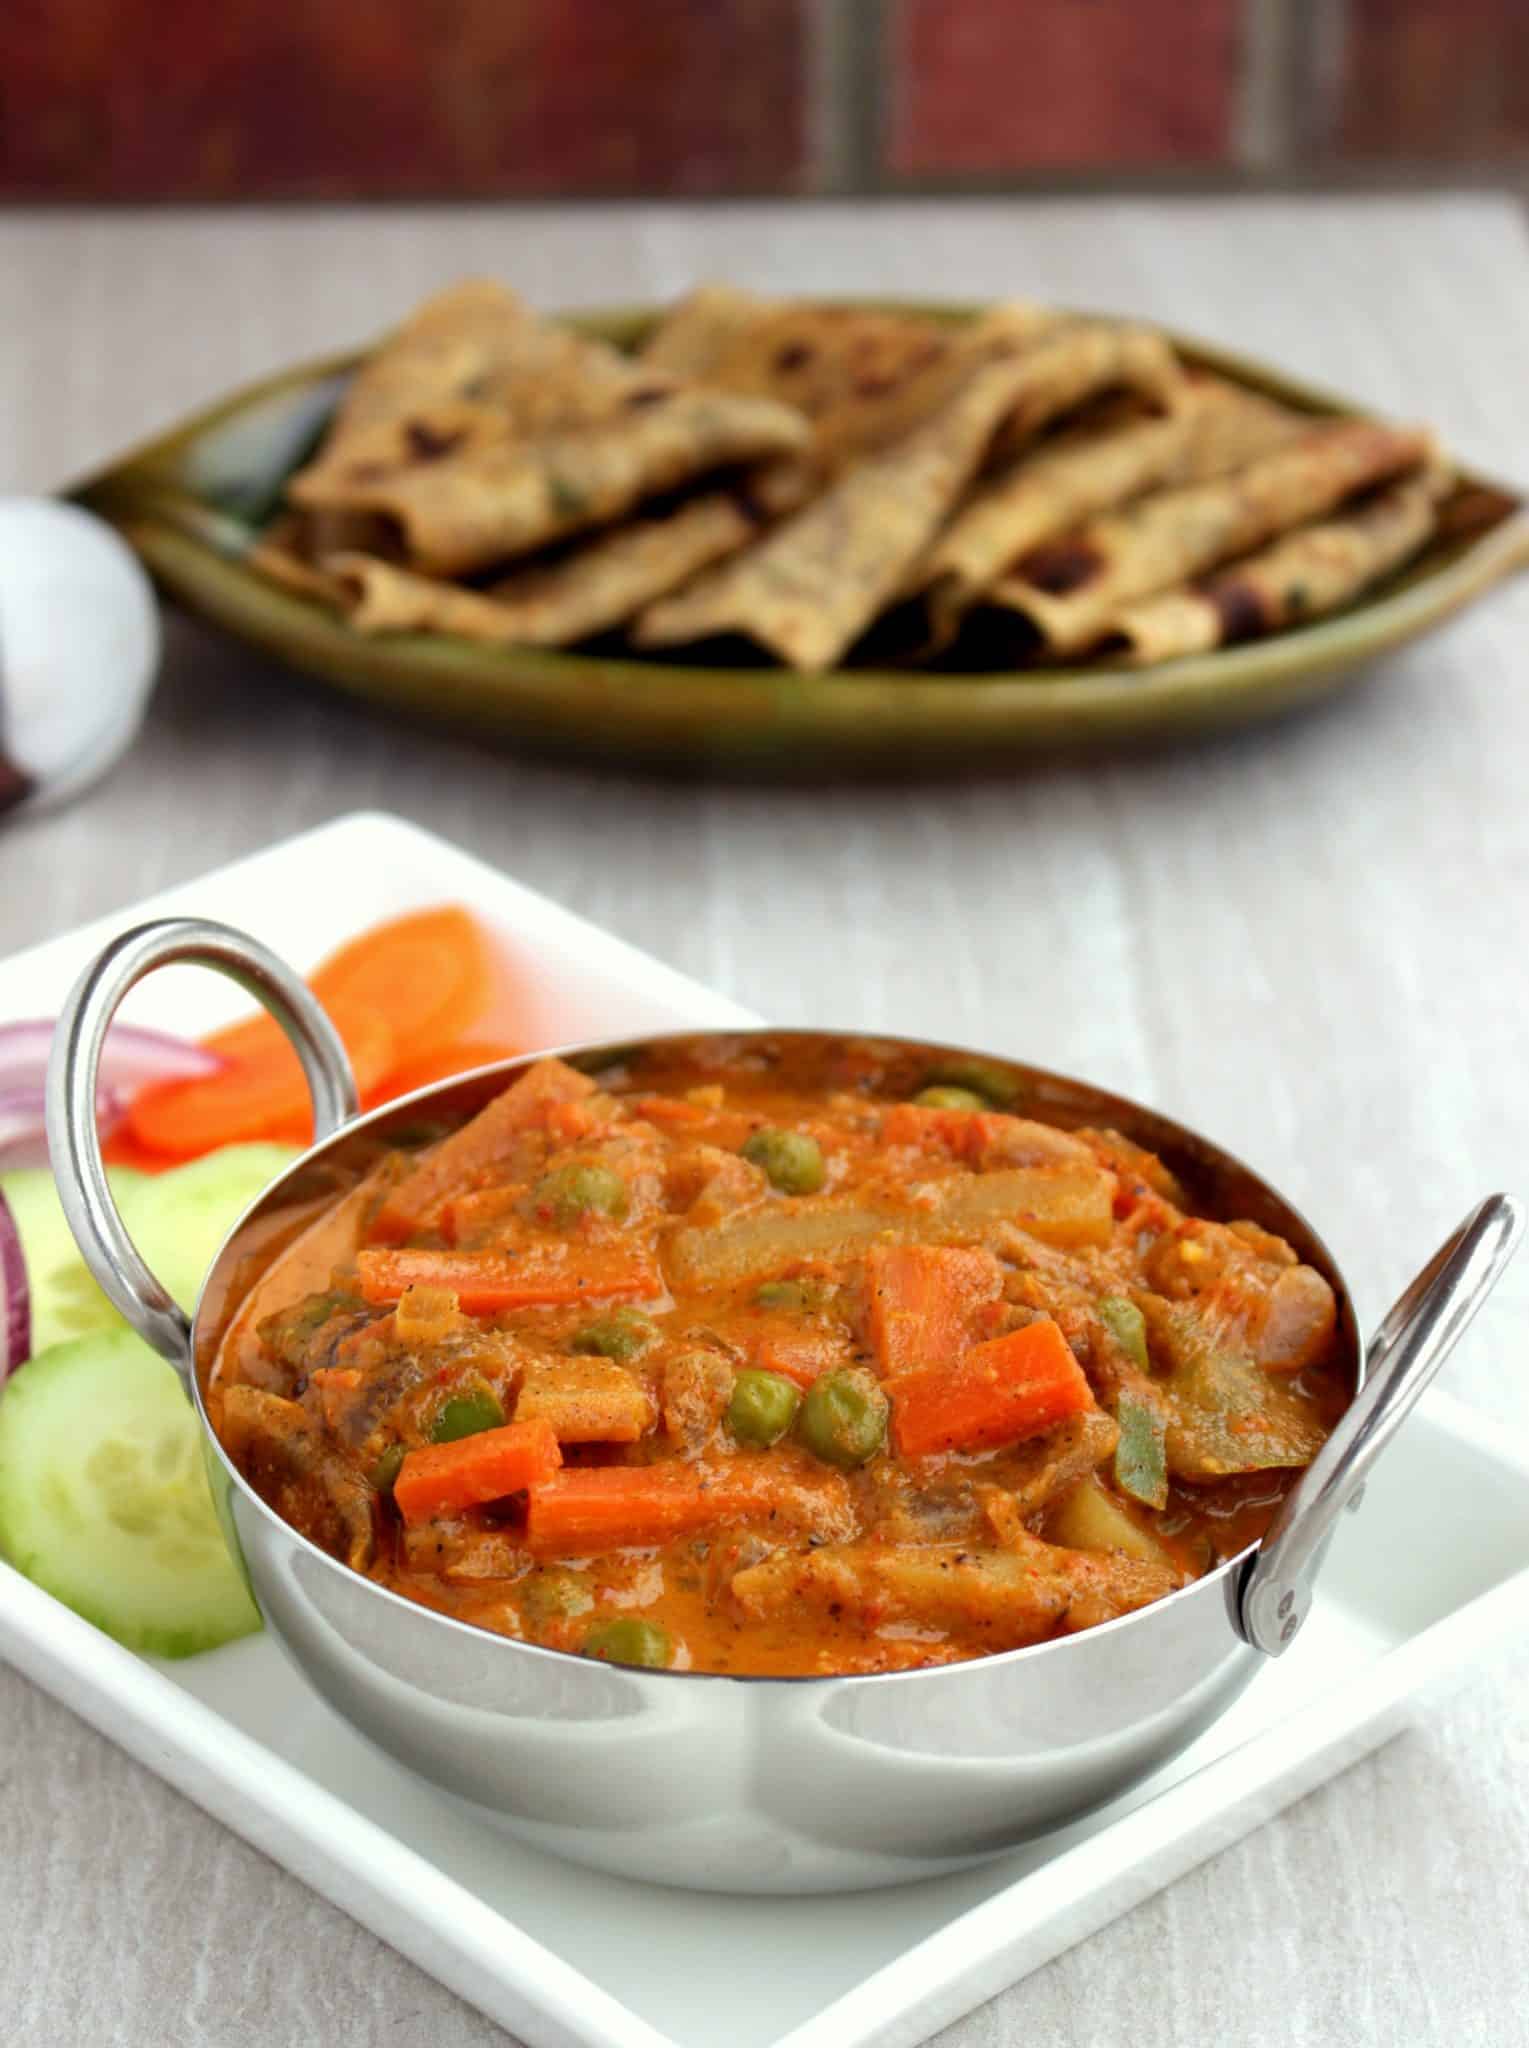 Kadai Vegetable Gravy with cucumber, carrot, Onion and roti on the side